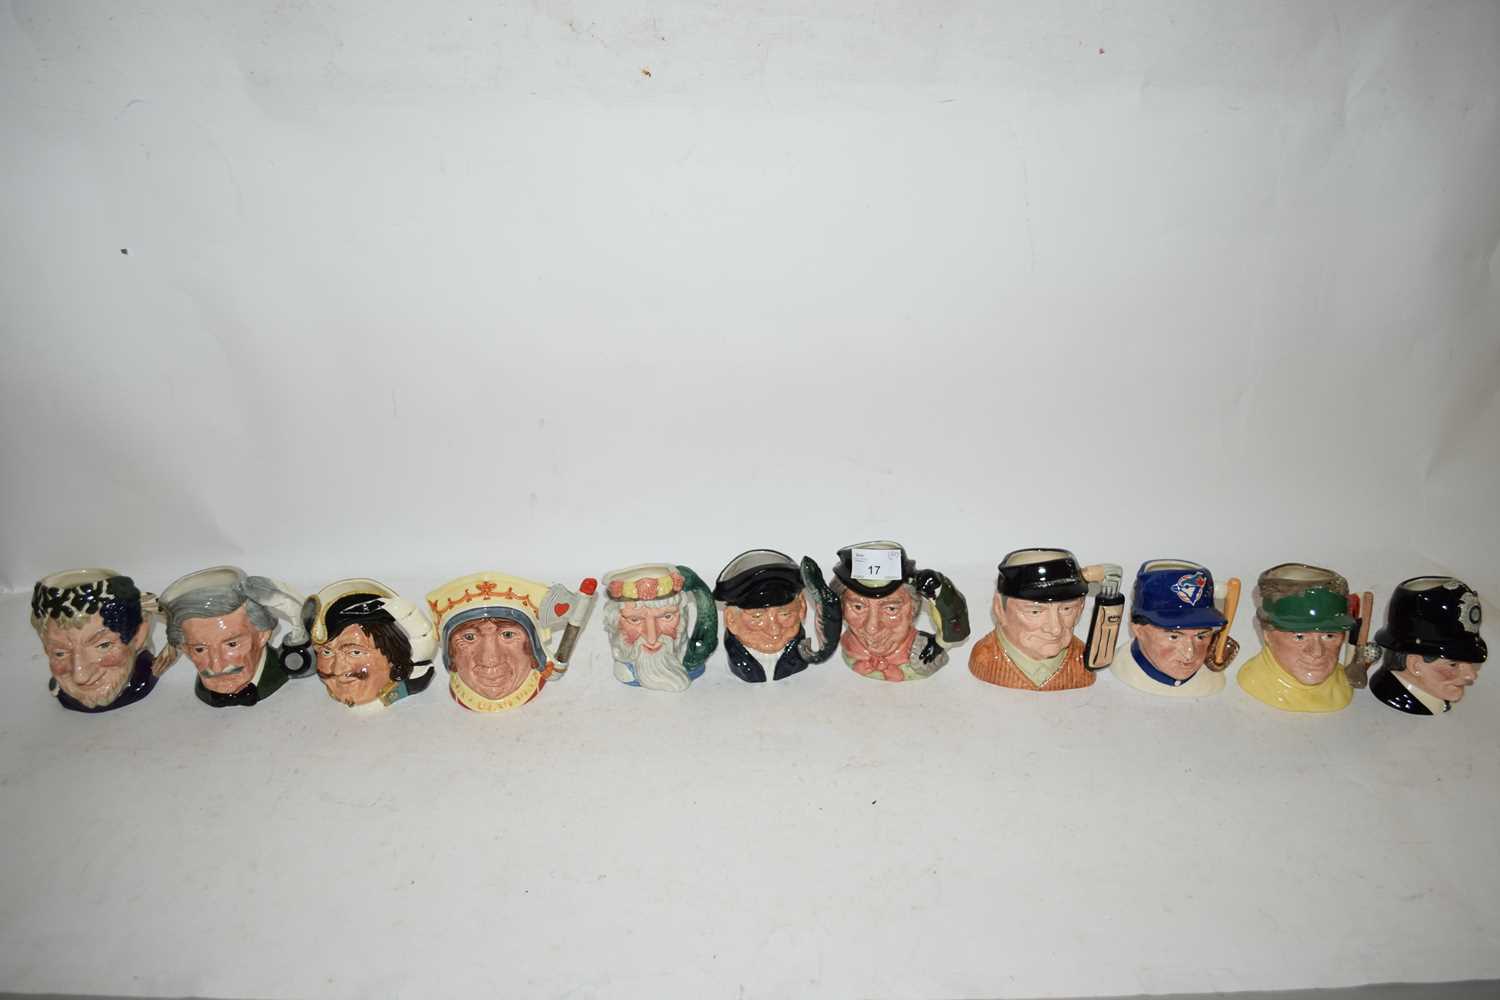 ELEVEN SMALL ROYAL DOULTON CHARACTER JUGS TO INCLUDE THE WALRUS AND CARPENTER, THE GOLFER,